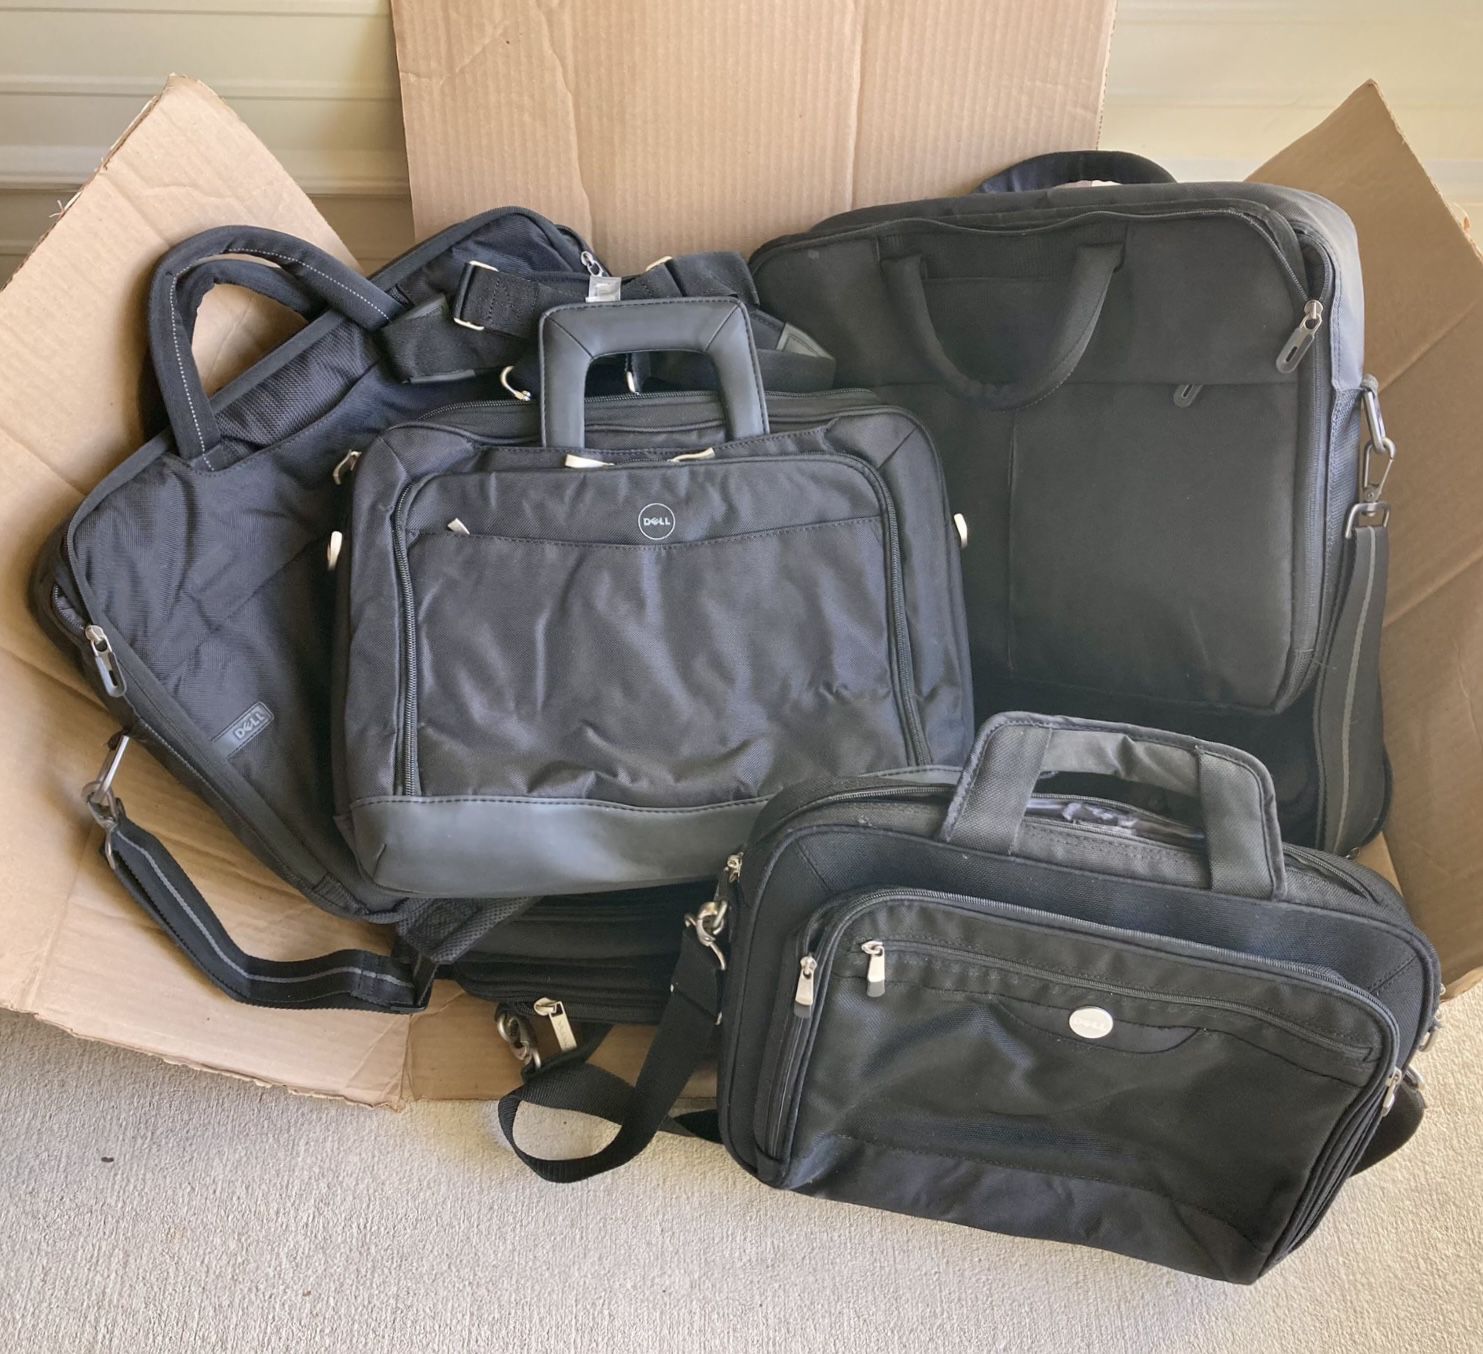 Laptop Bag Cases for Computer or Tablet - Some Dell and a Few Others 